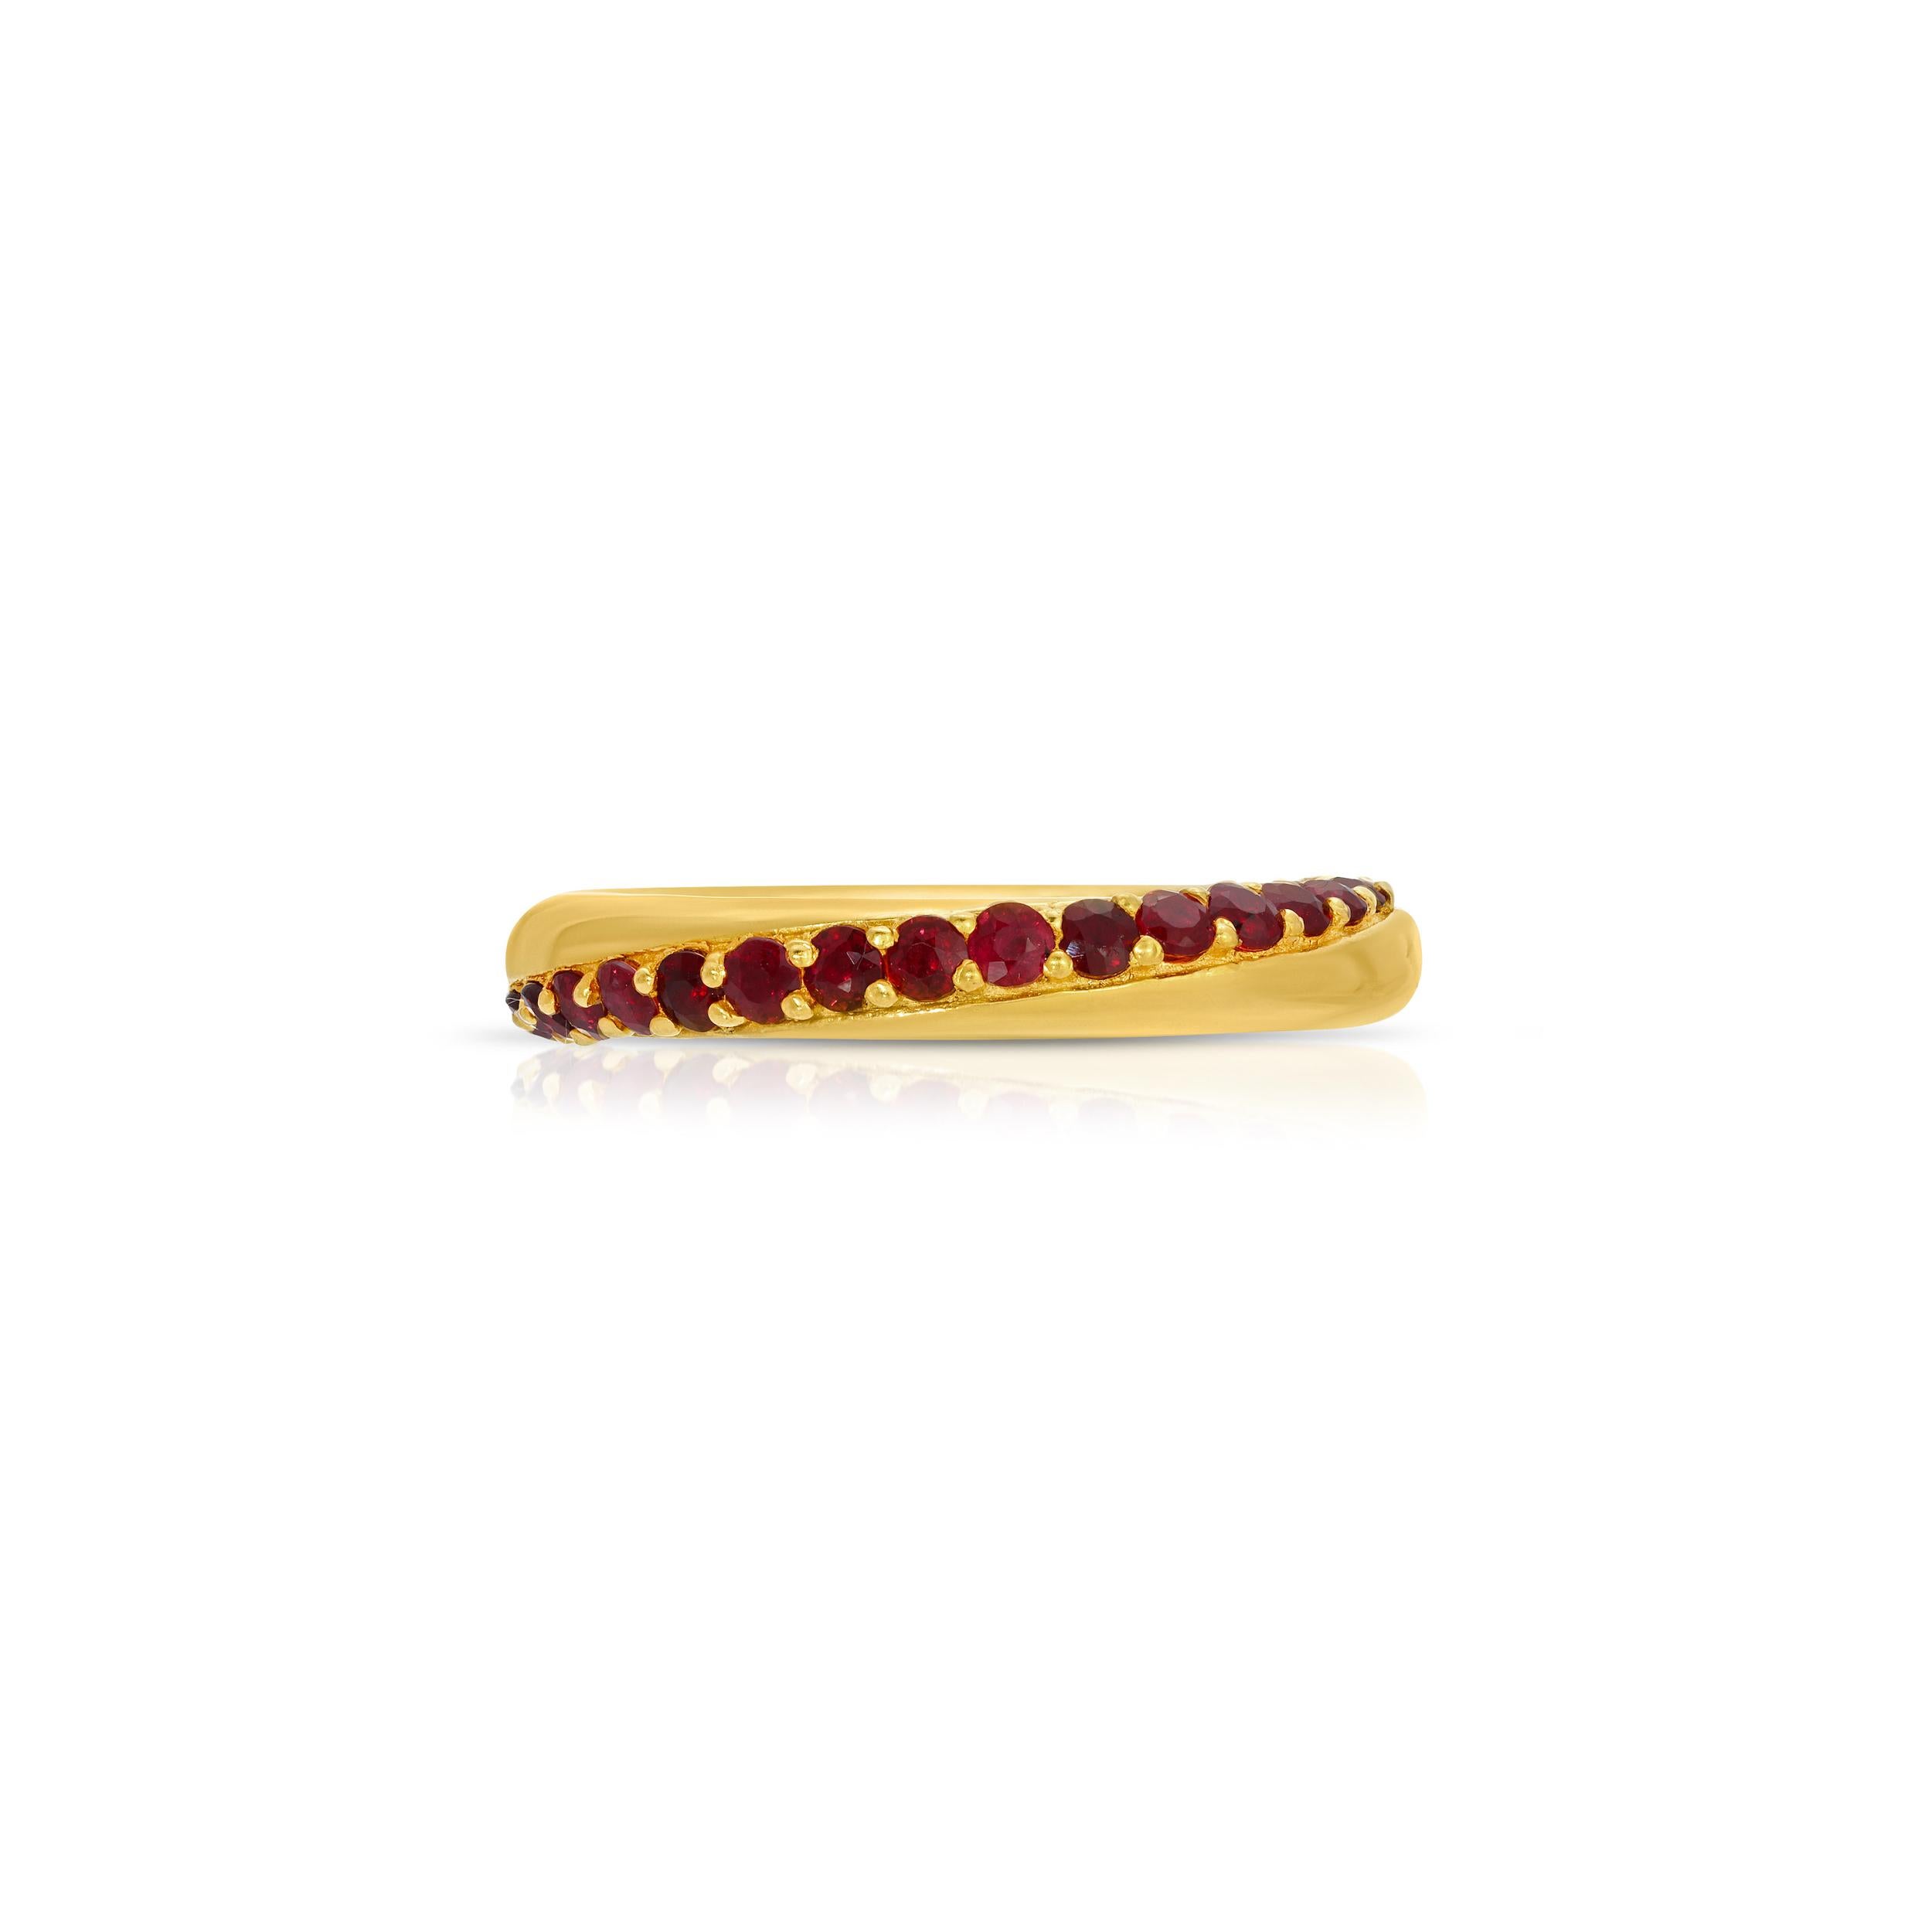 A rounded gold band of contemporary design featuring stunning gemstones. This ring features 2.42 Carats of fiery red Rubies set in a modern swirl design. This ring is set in 22 Karat Gold overlay Silver.